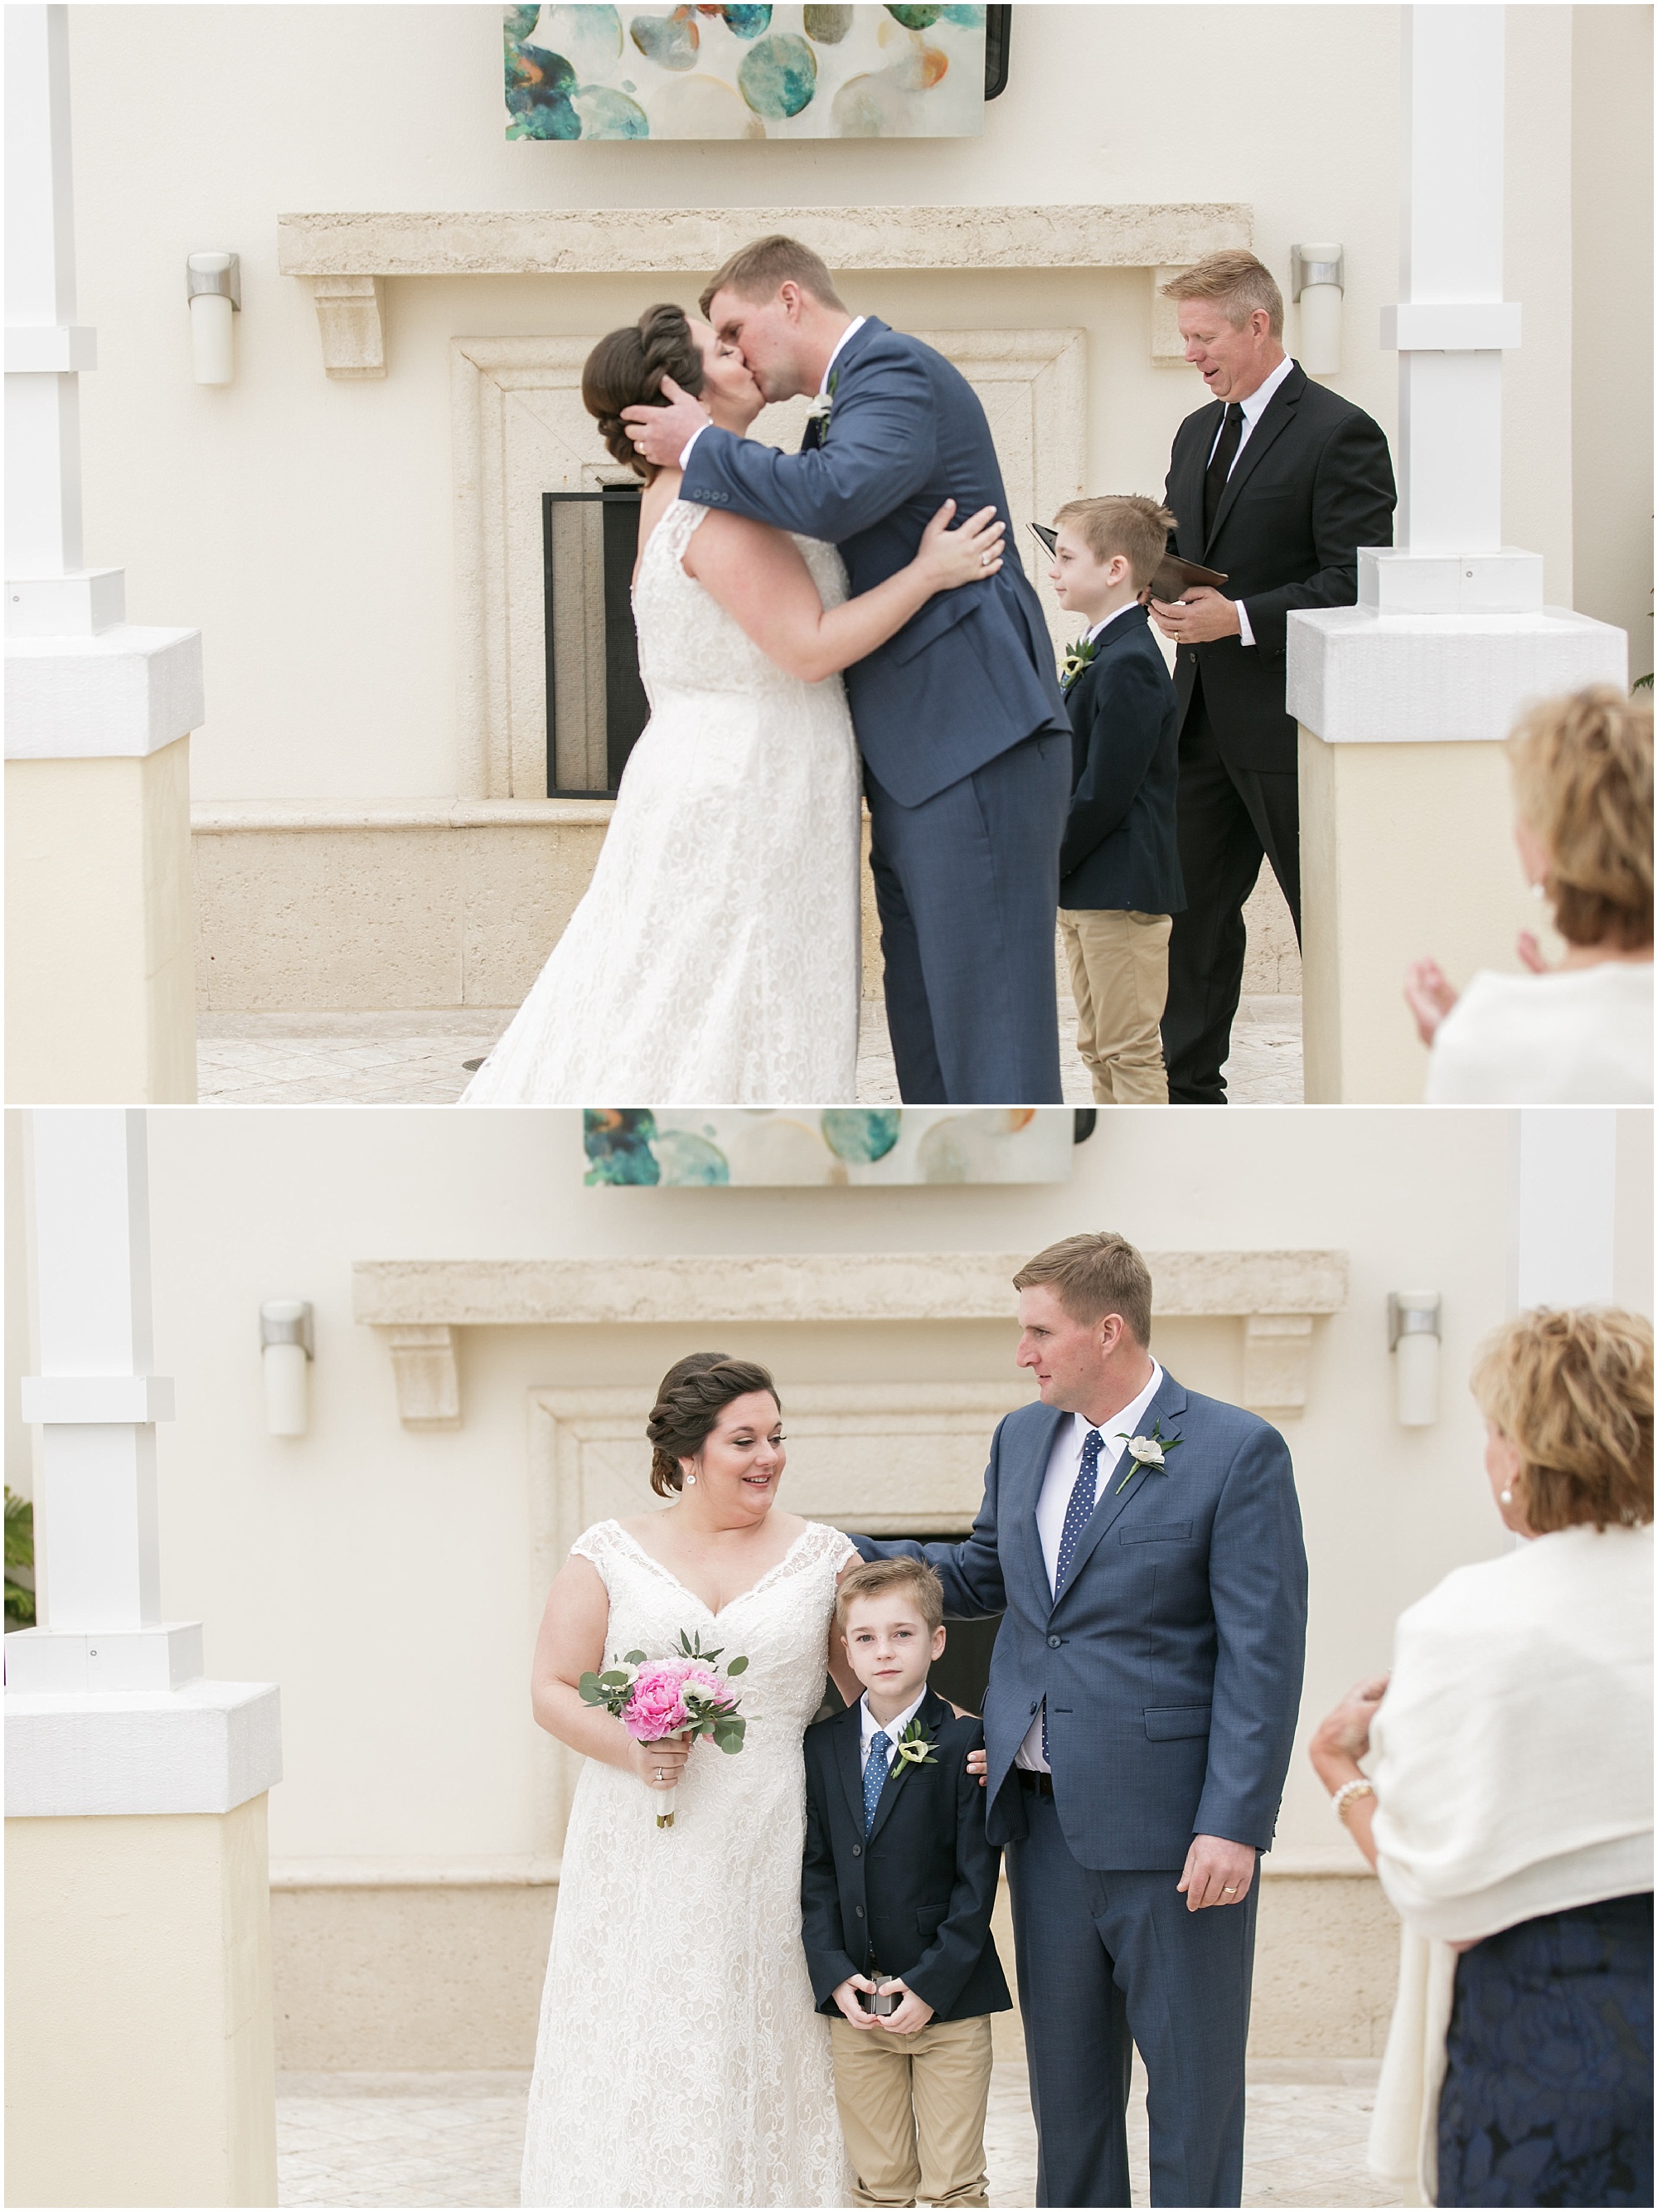 Couple share their first kiss as husband and wife and accept cheers from their family. 